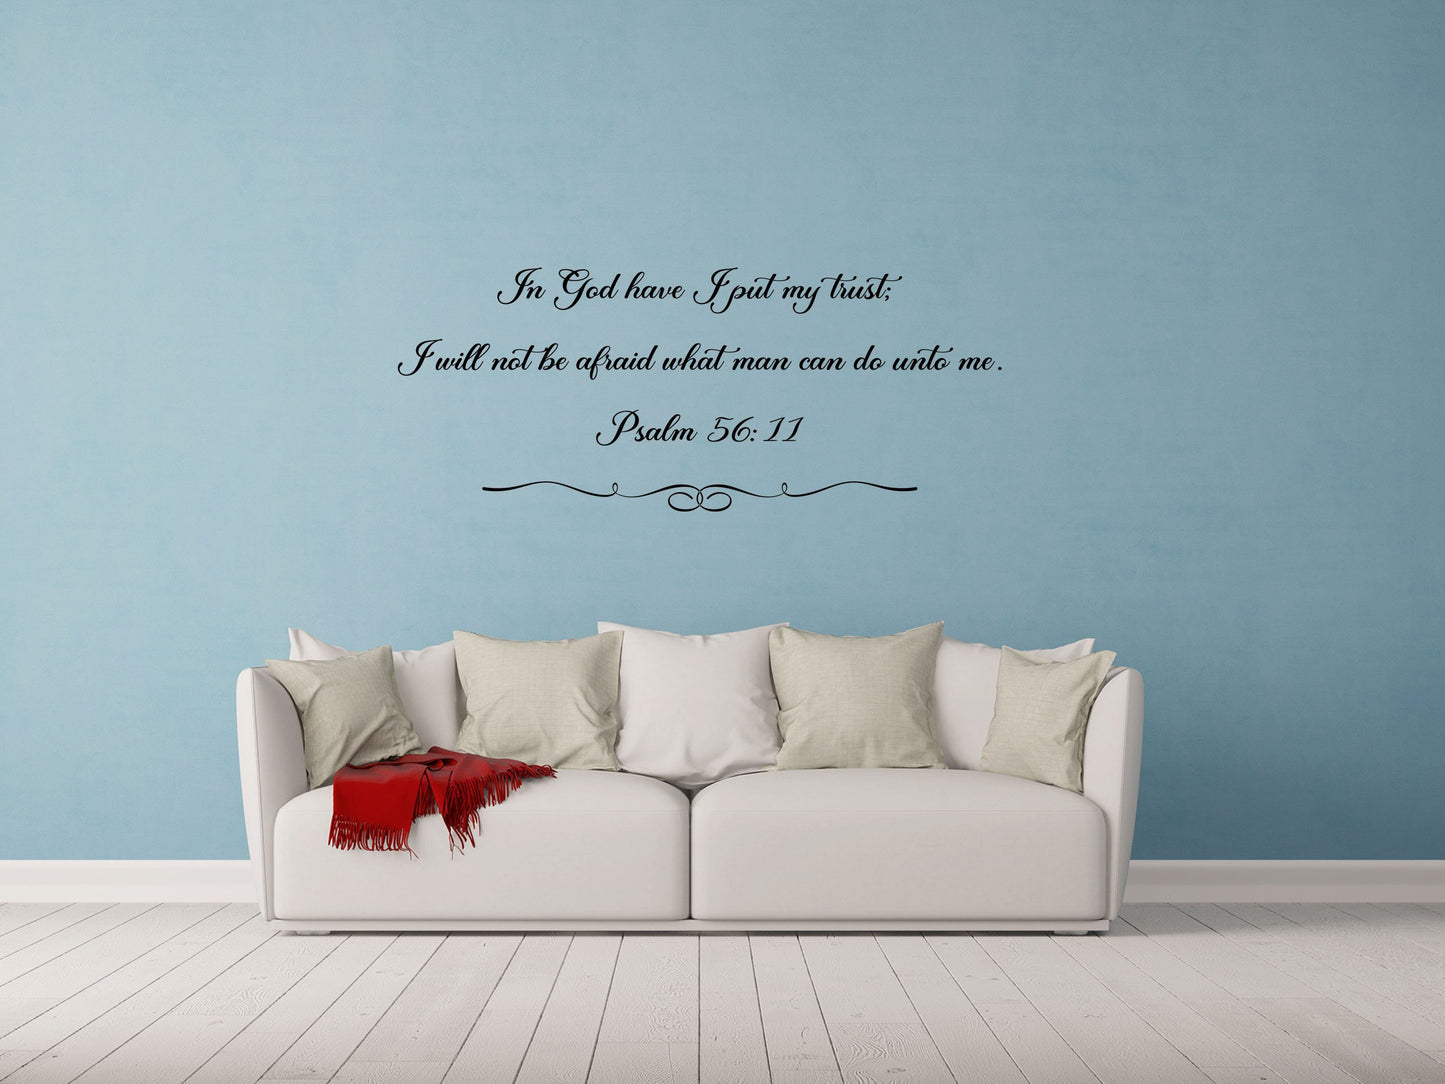 Psalm 56:11 KJV Bible Scripture Decal - In God have I Put My Trust - Bible Verse Decal - Vinyl Wall Decal - Wall Art Scripture Vinyl Wall Decal Done 